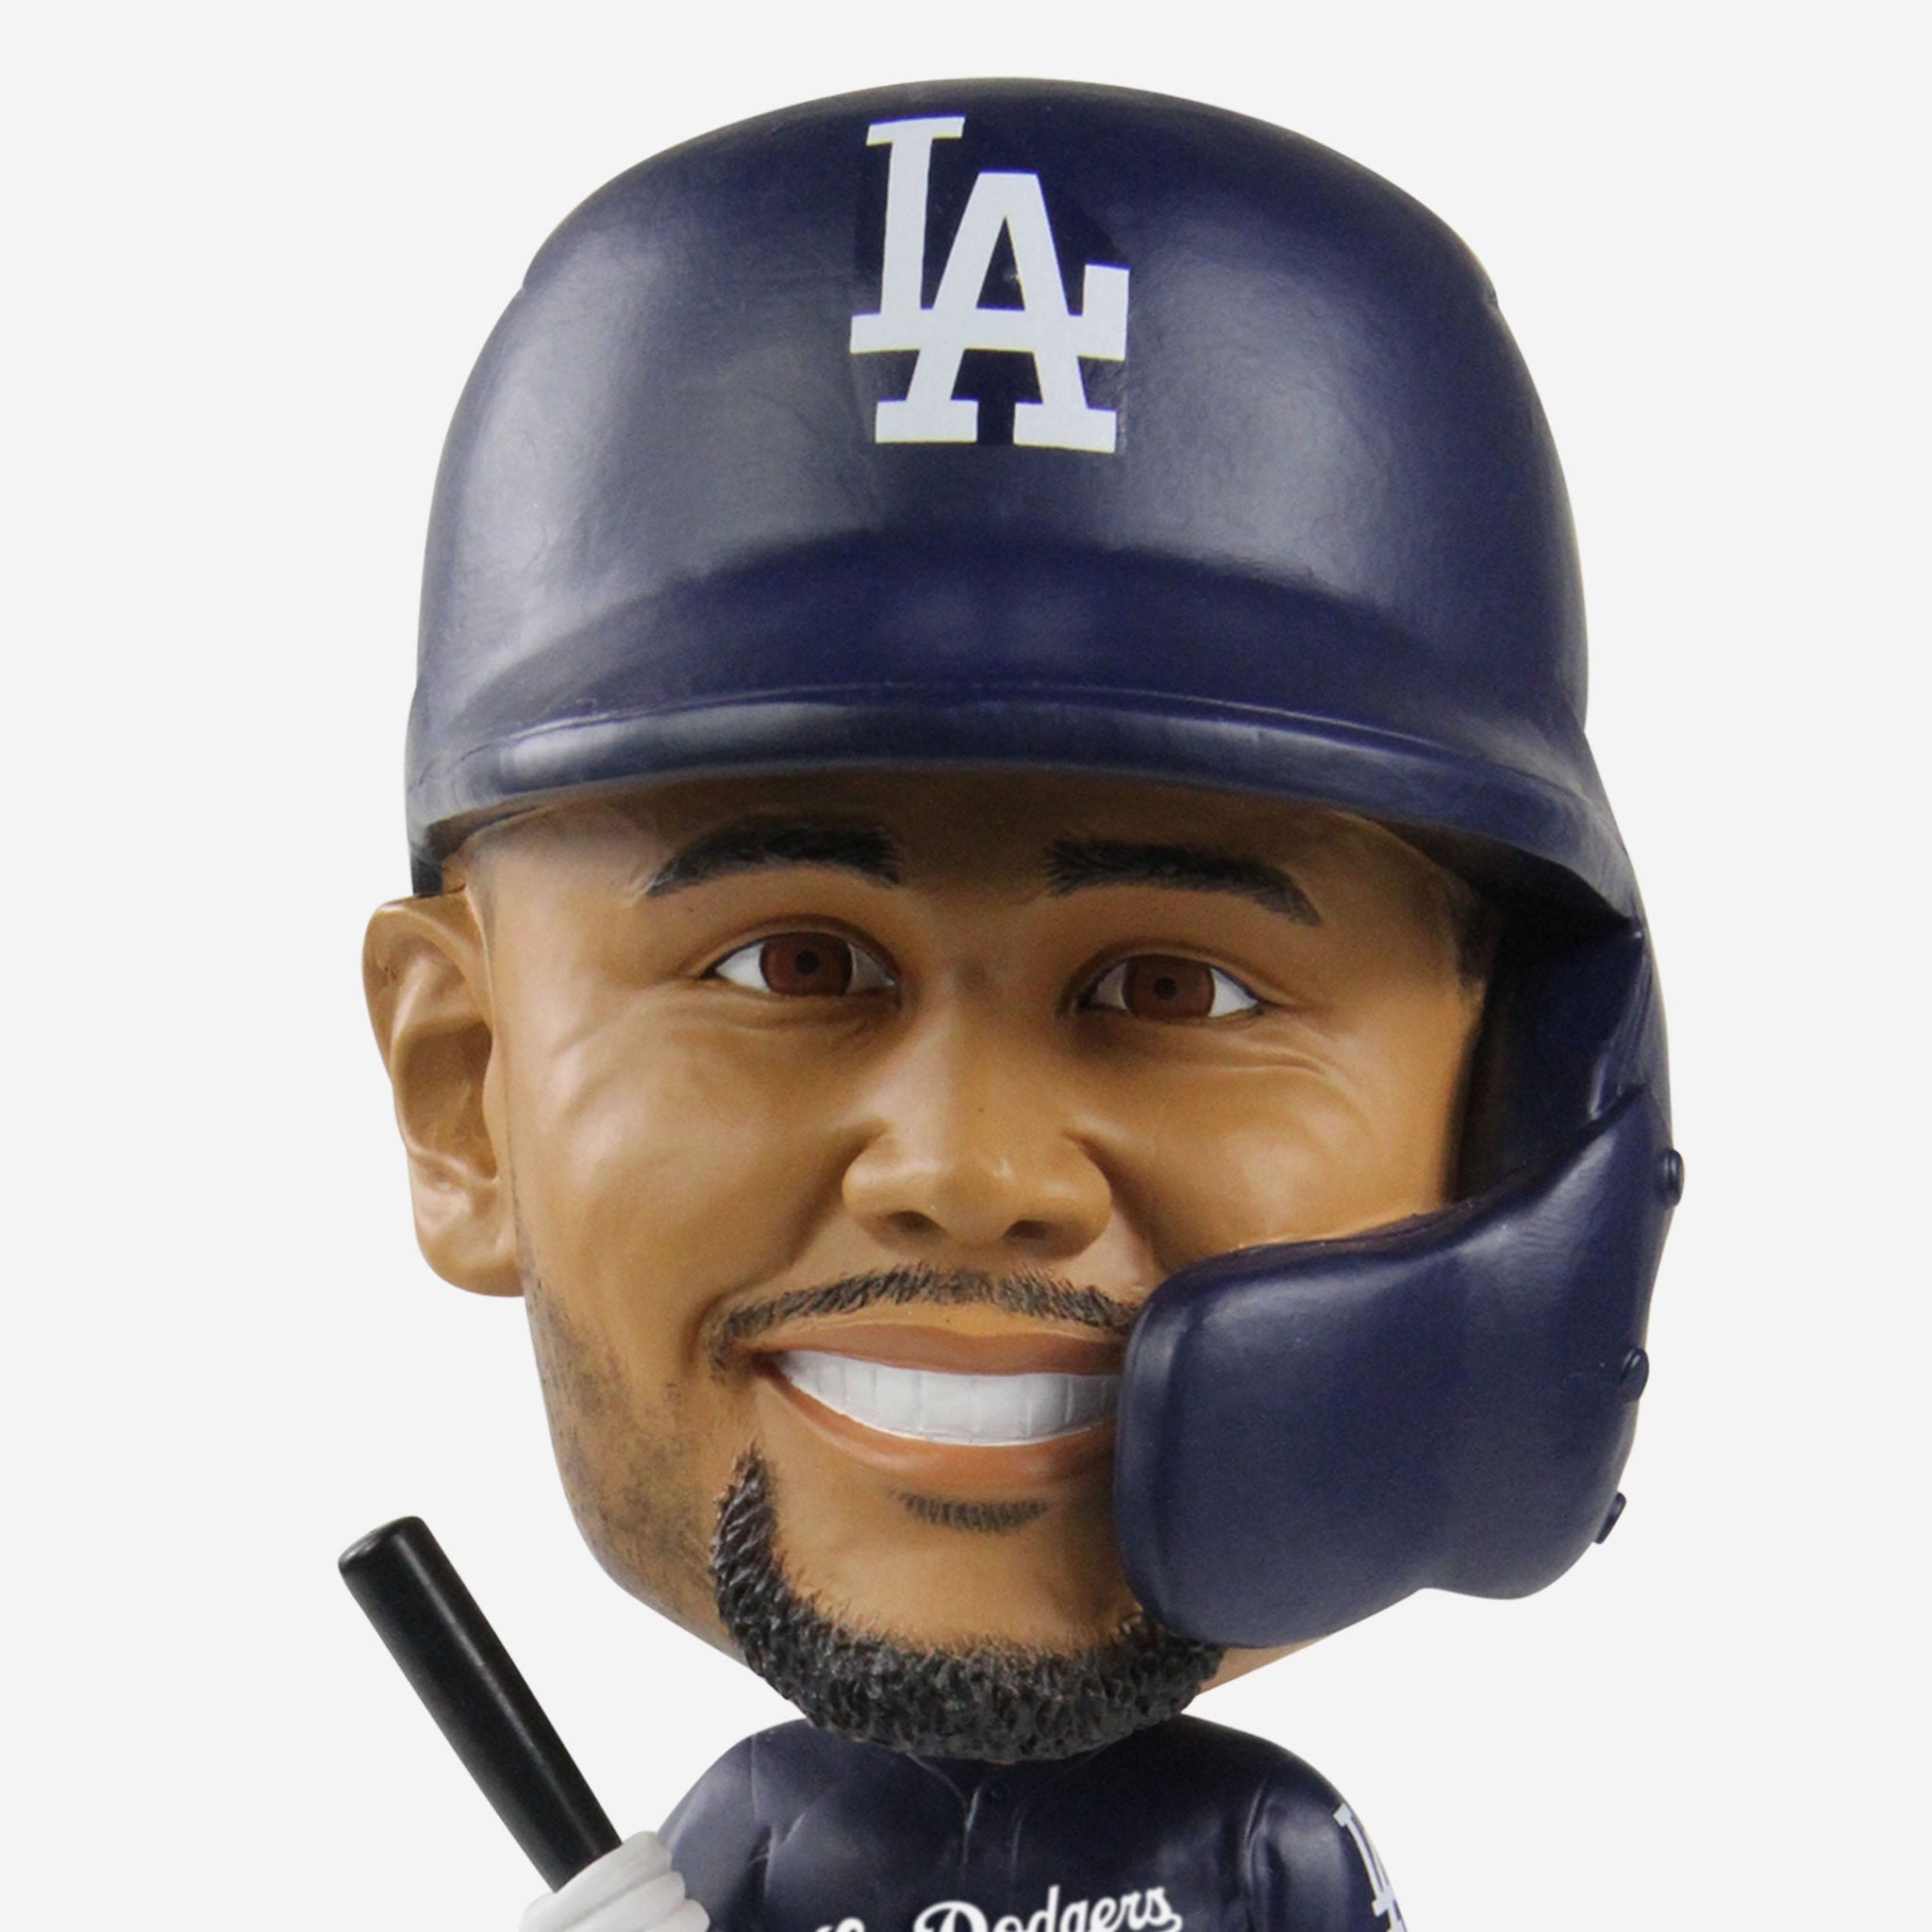 Mookie Betts Los Angeles Dodgers 2023 City Connect Bobblehead FOCO